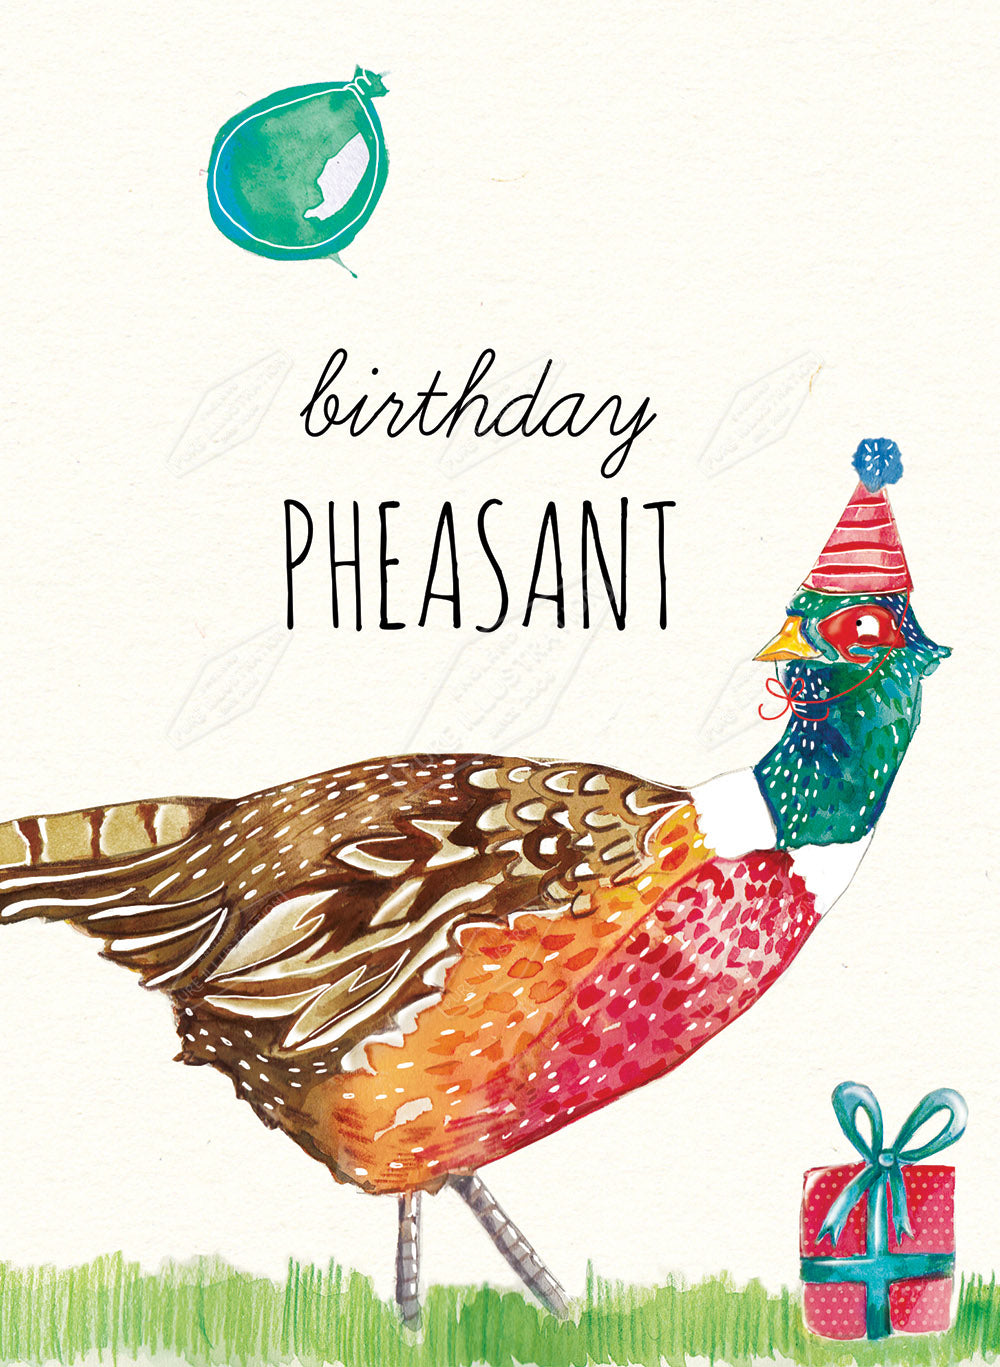 00028550EST- Emily Stalley is represented by Pure Art Licensing Agency - Birthday Greeting Card Design